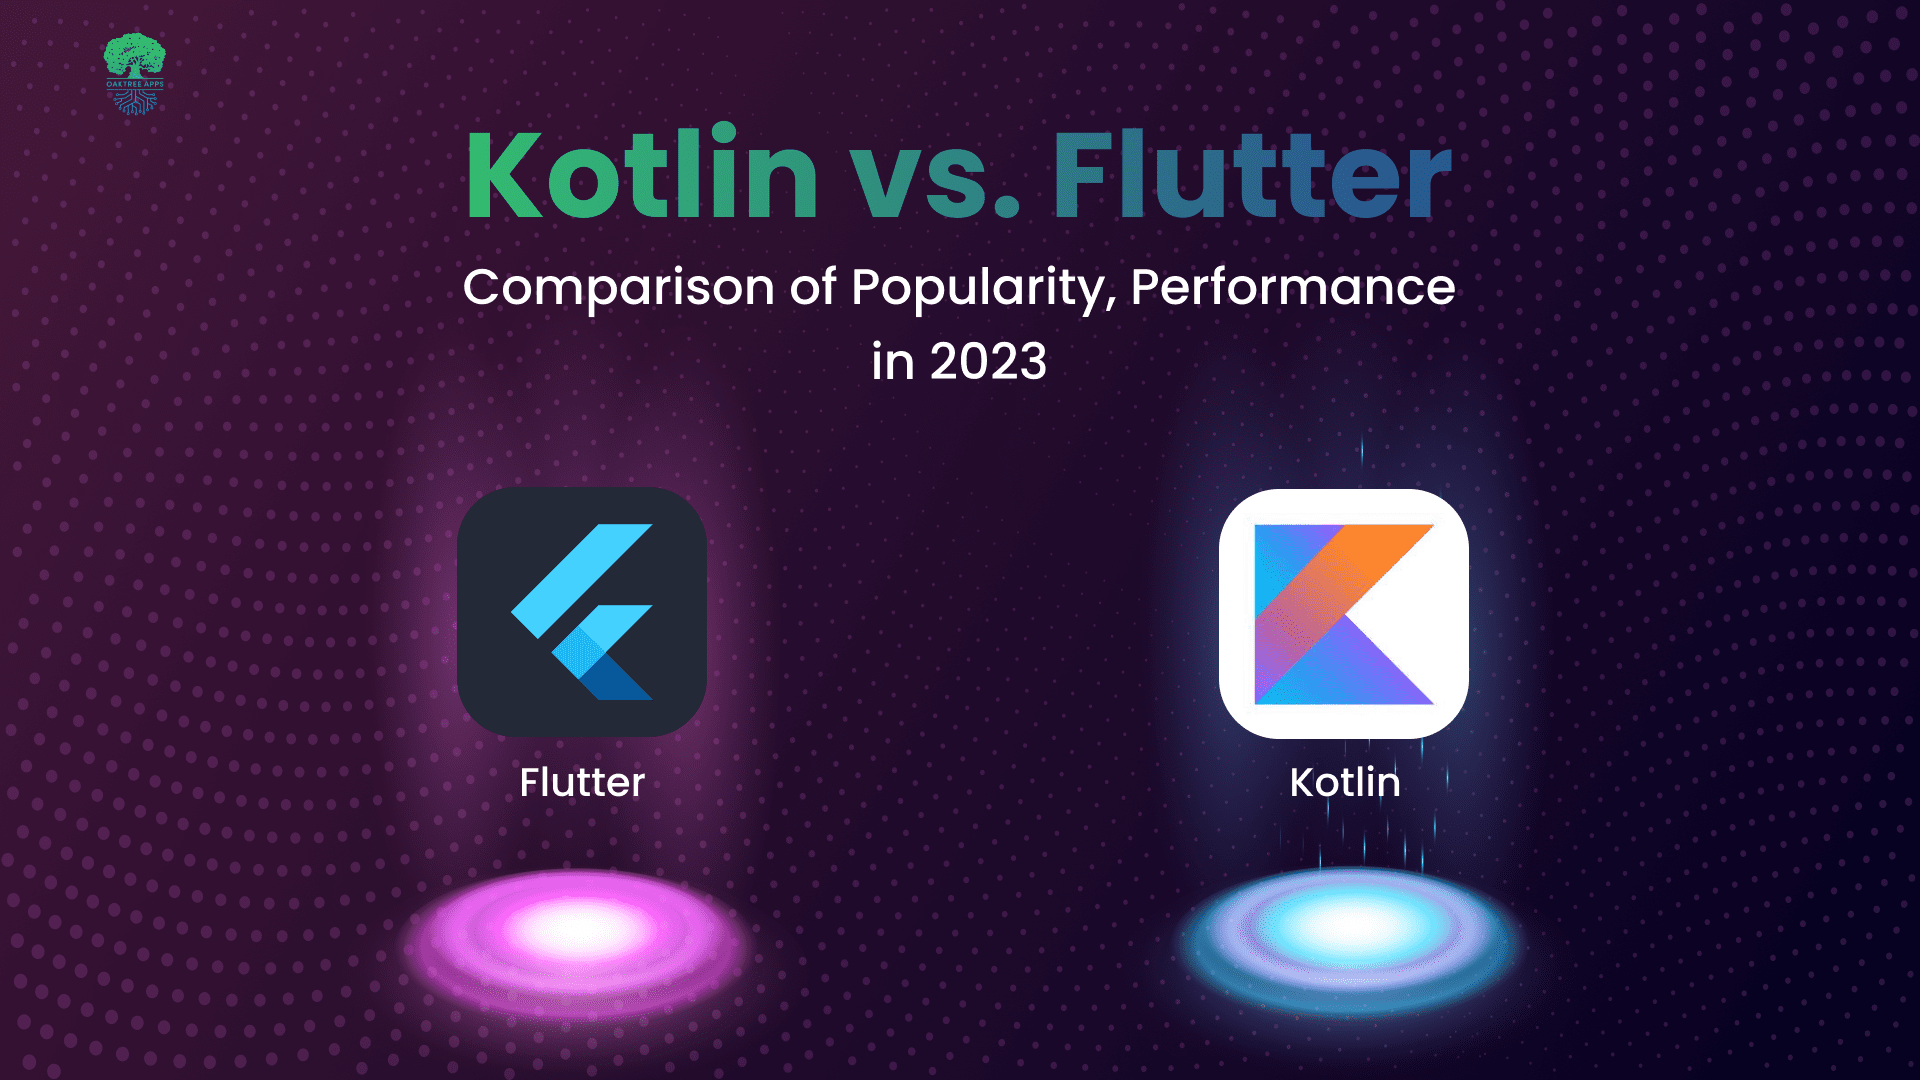 Kotlin_vs_Flutter_comparision_of_popularity_and_performance.png